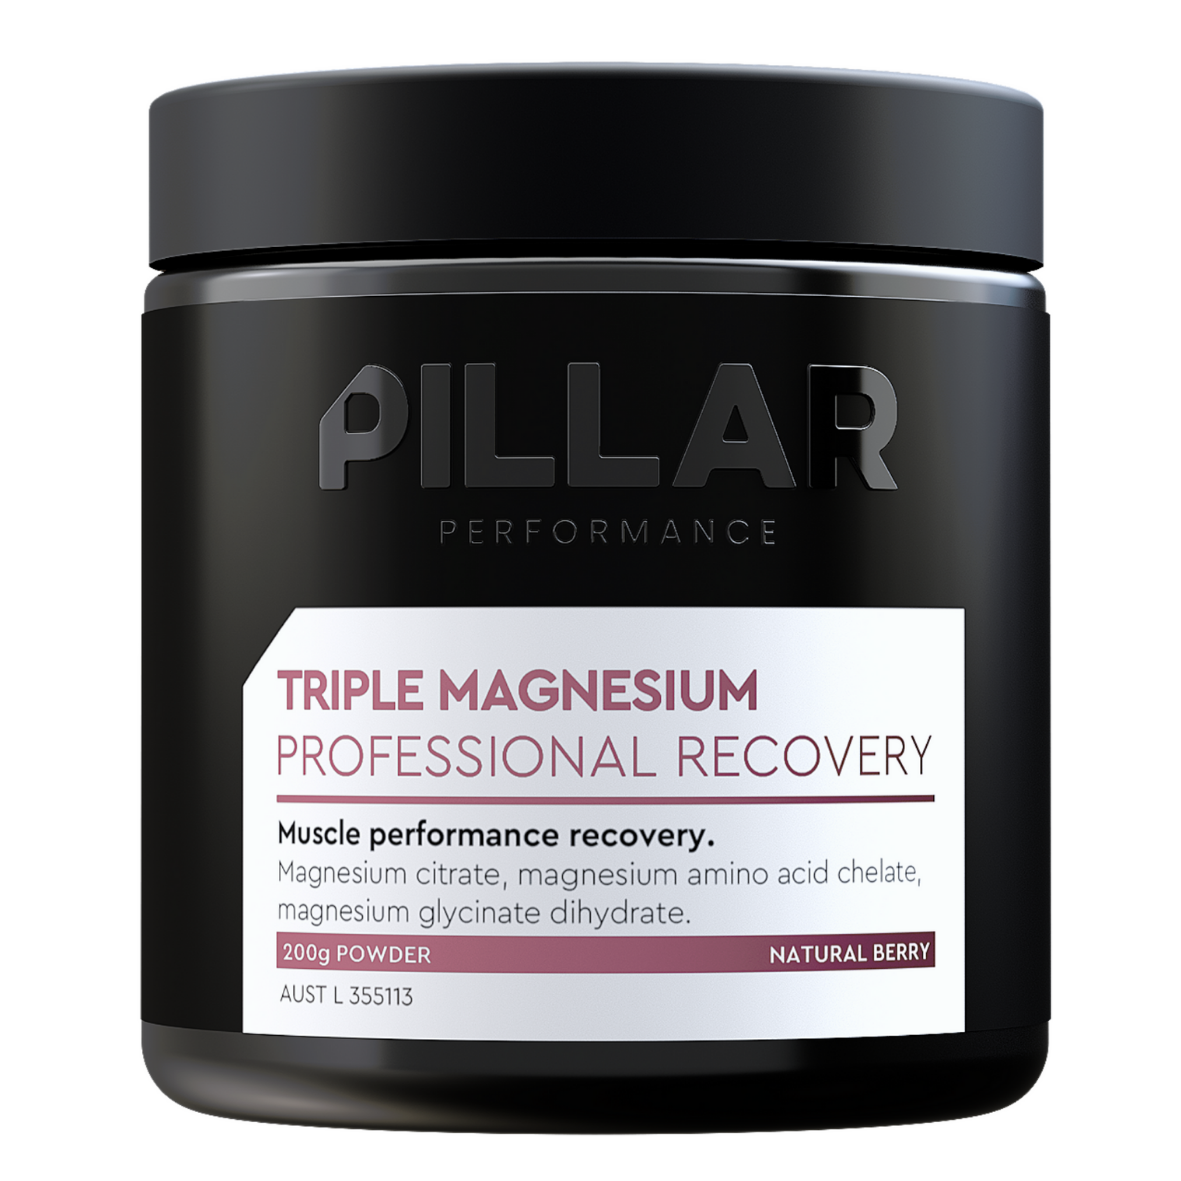 Pillar Performance - Triple Magnesium Recovery Powder - Natural Berry